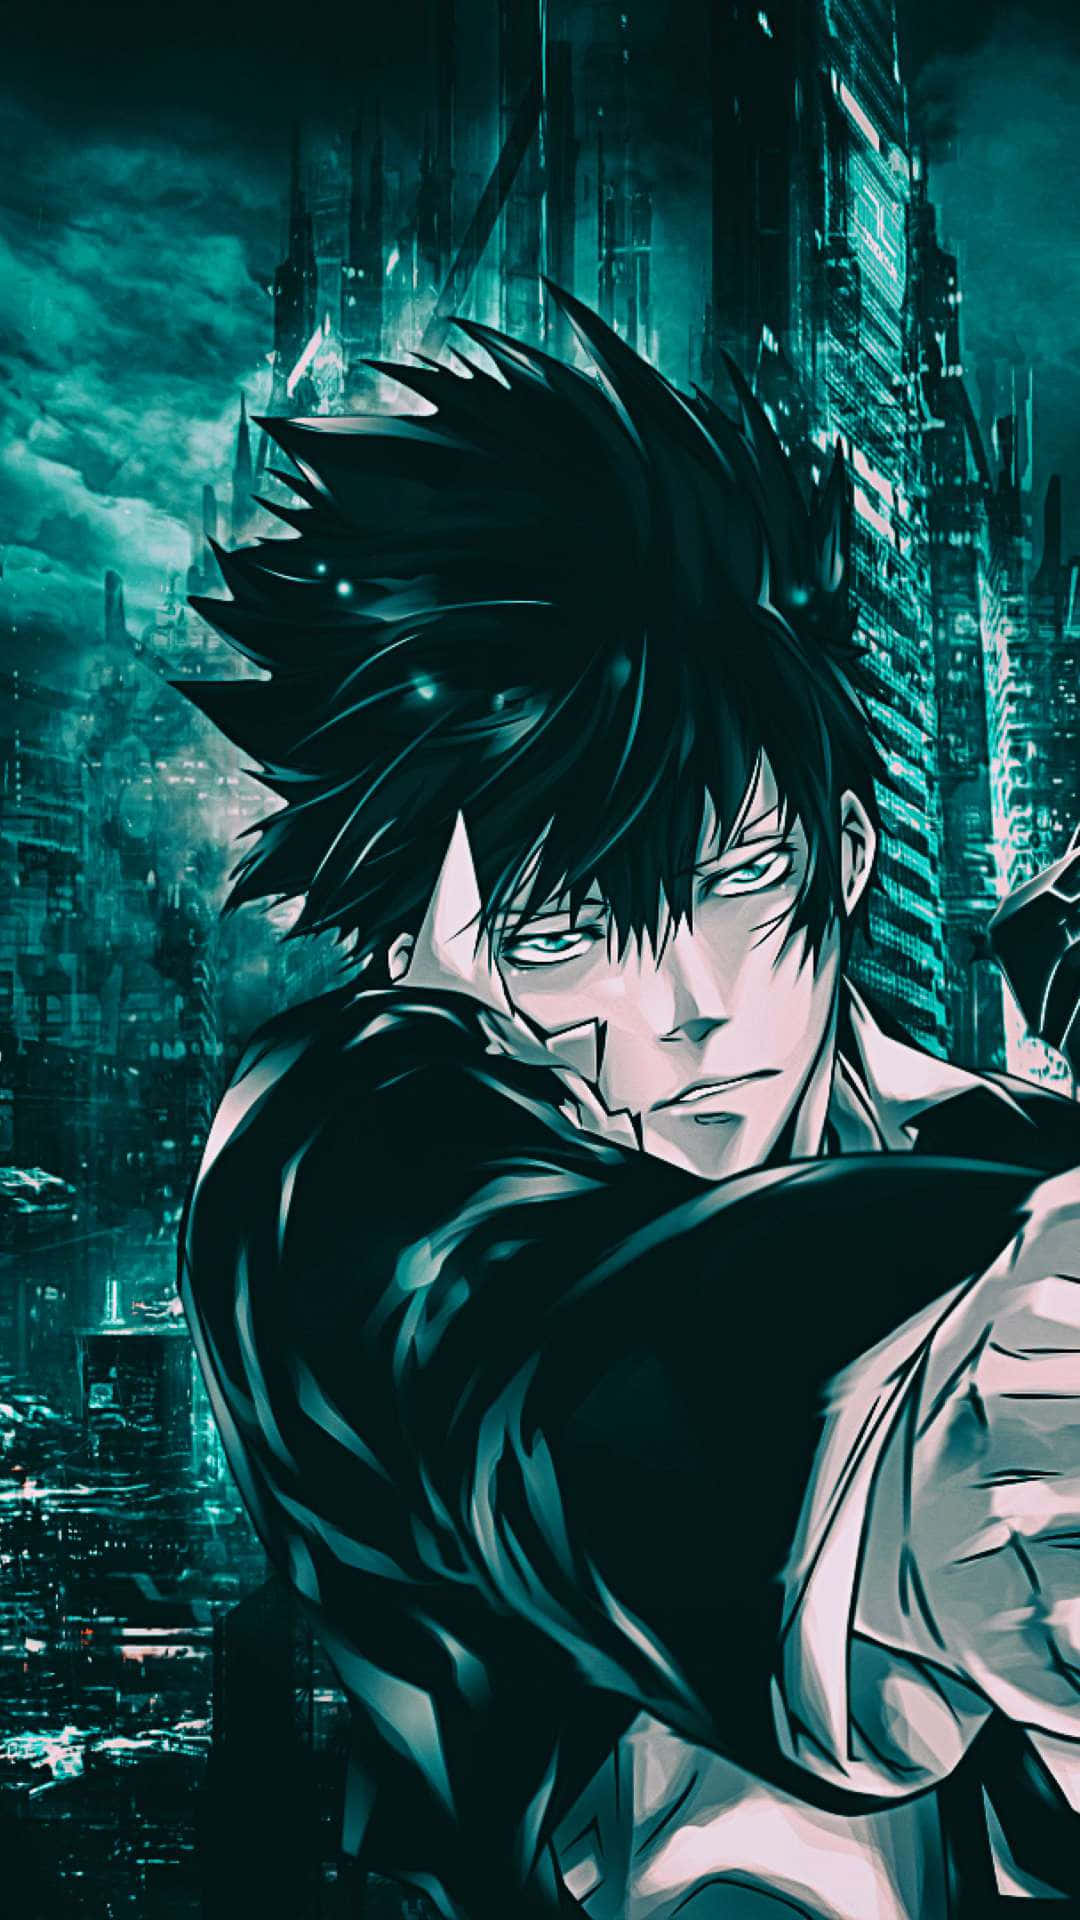 Experience The World Of Psycho Pass And Its Themes Of Justice And Crime Background